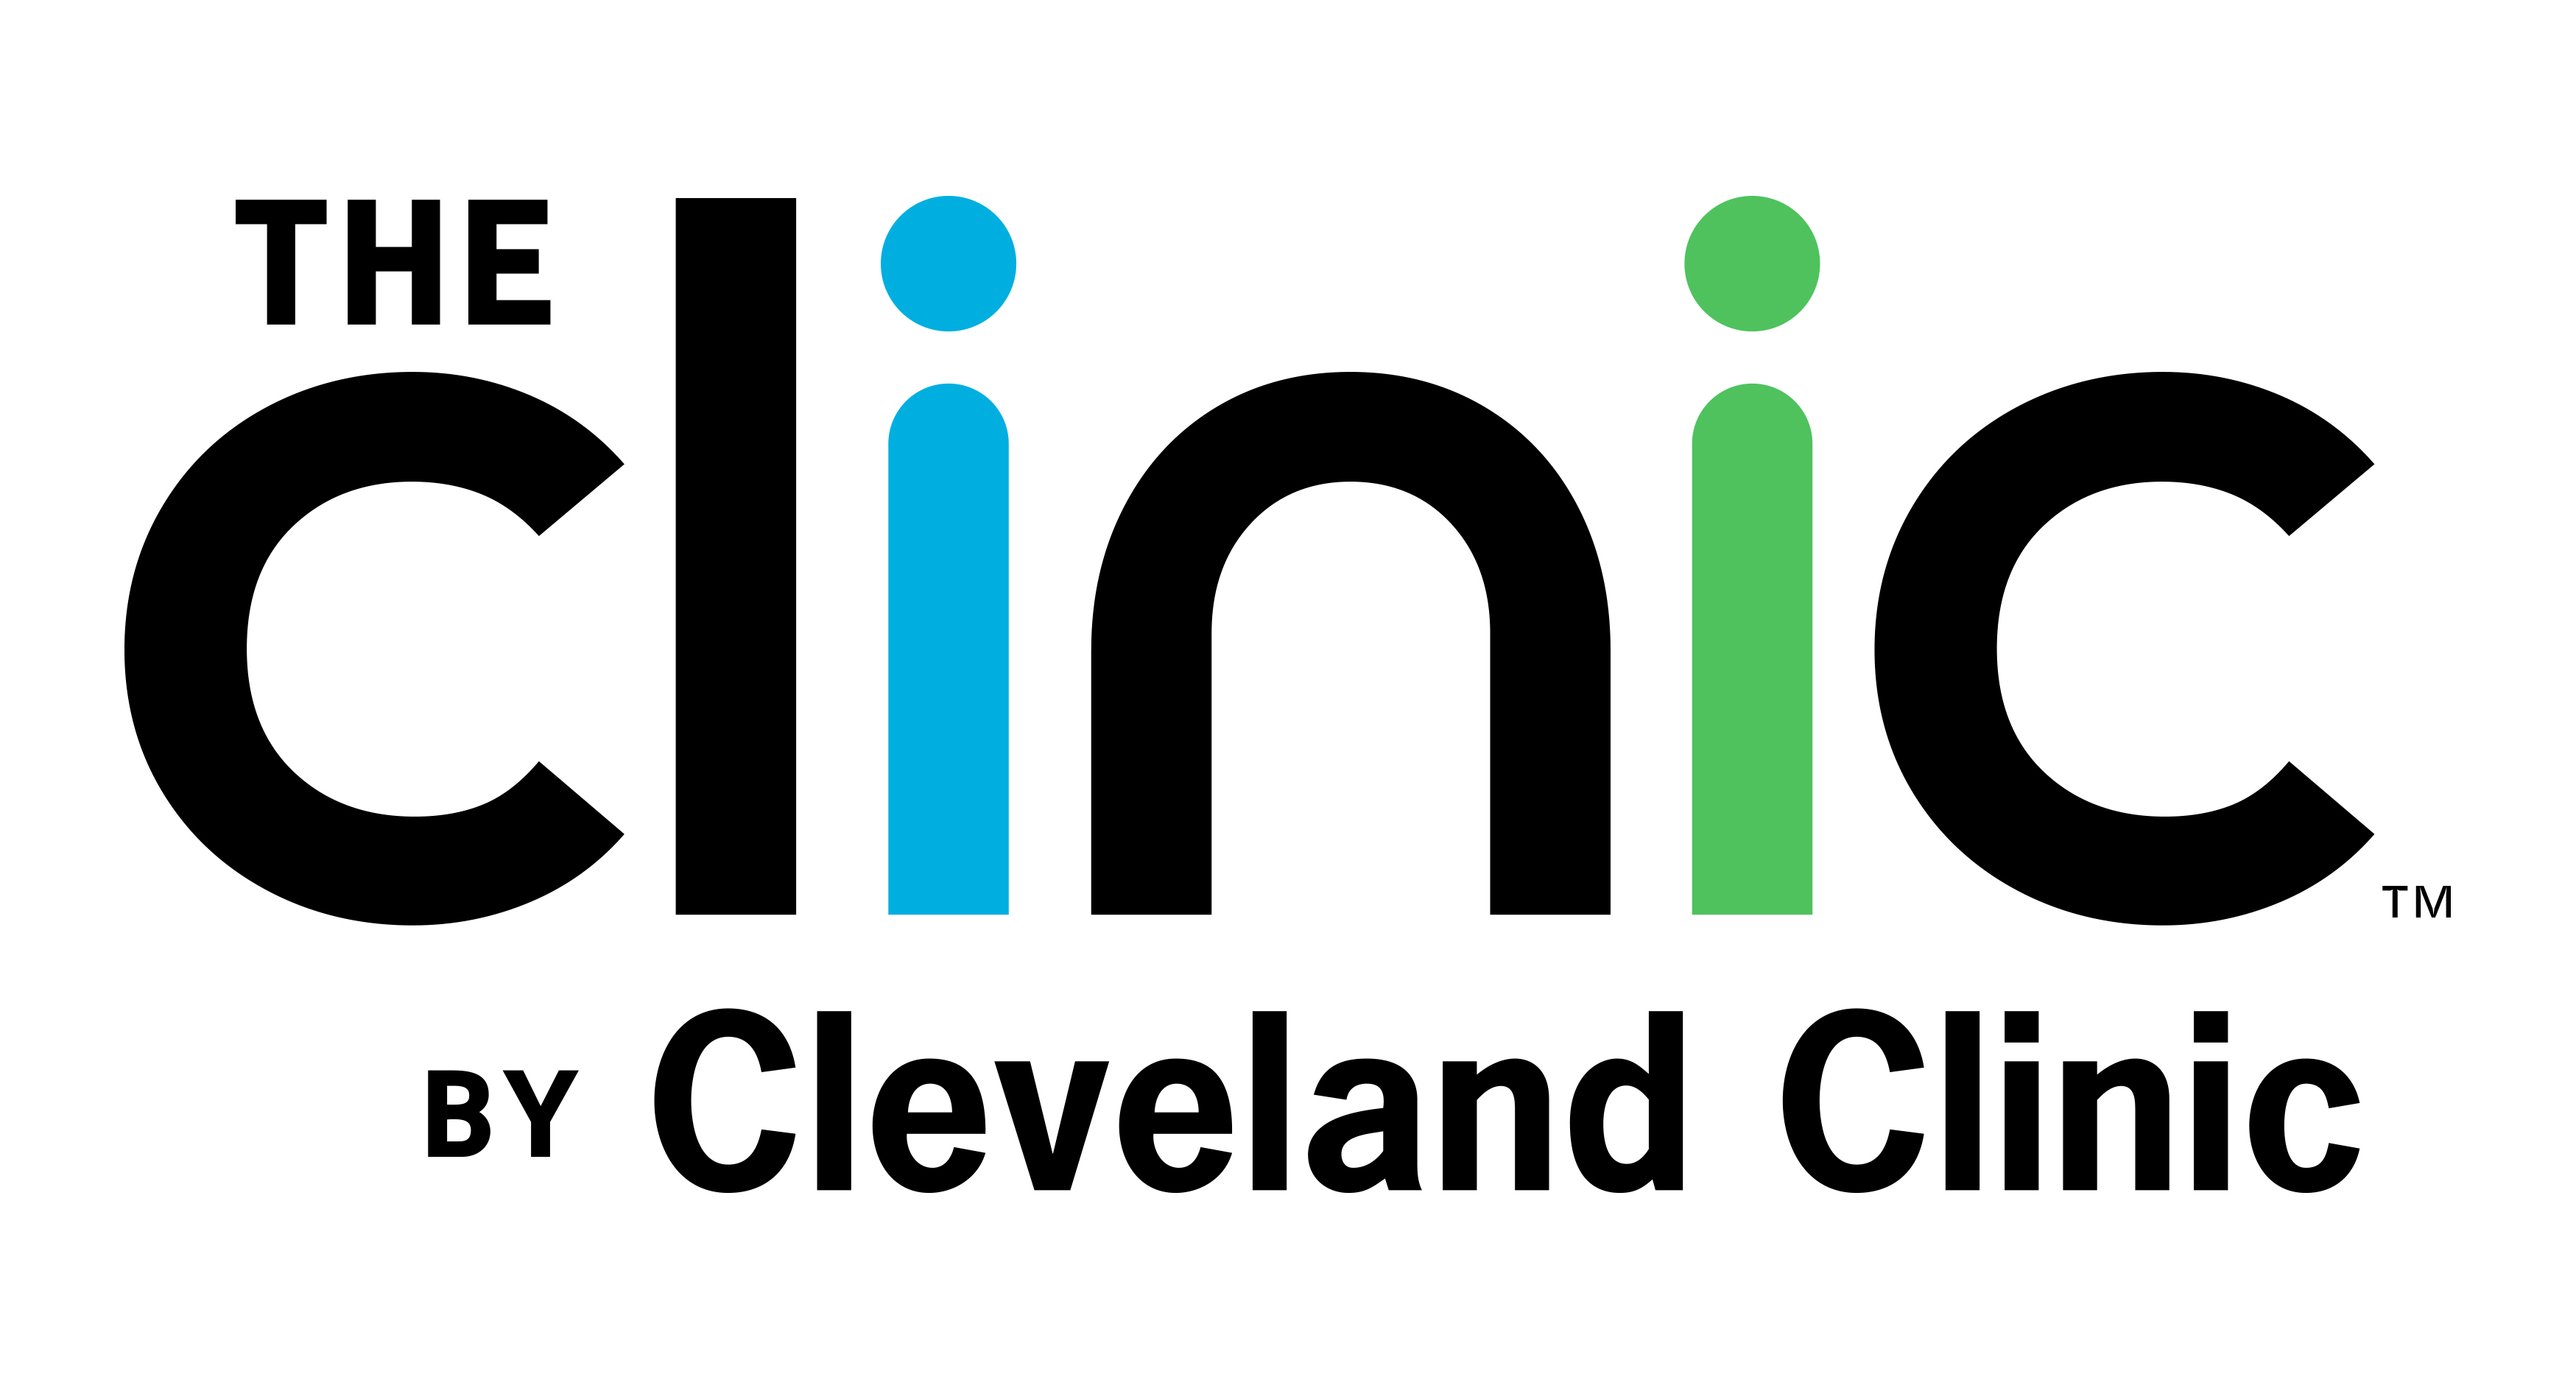 The Clinic by Cleveland Clinic